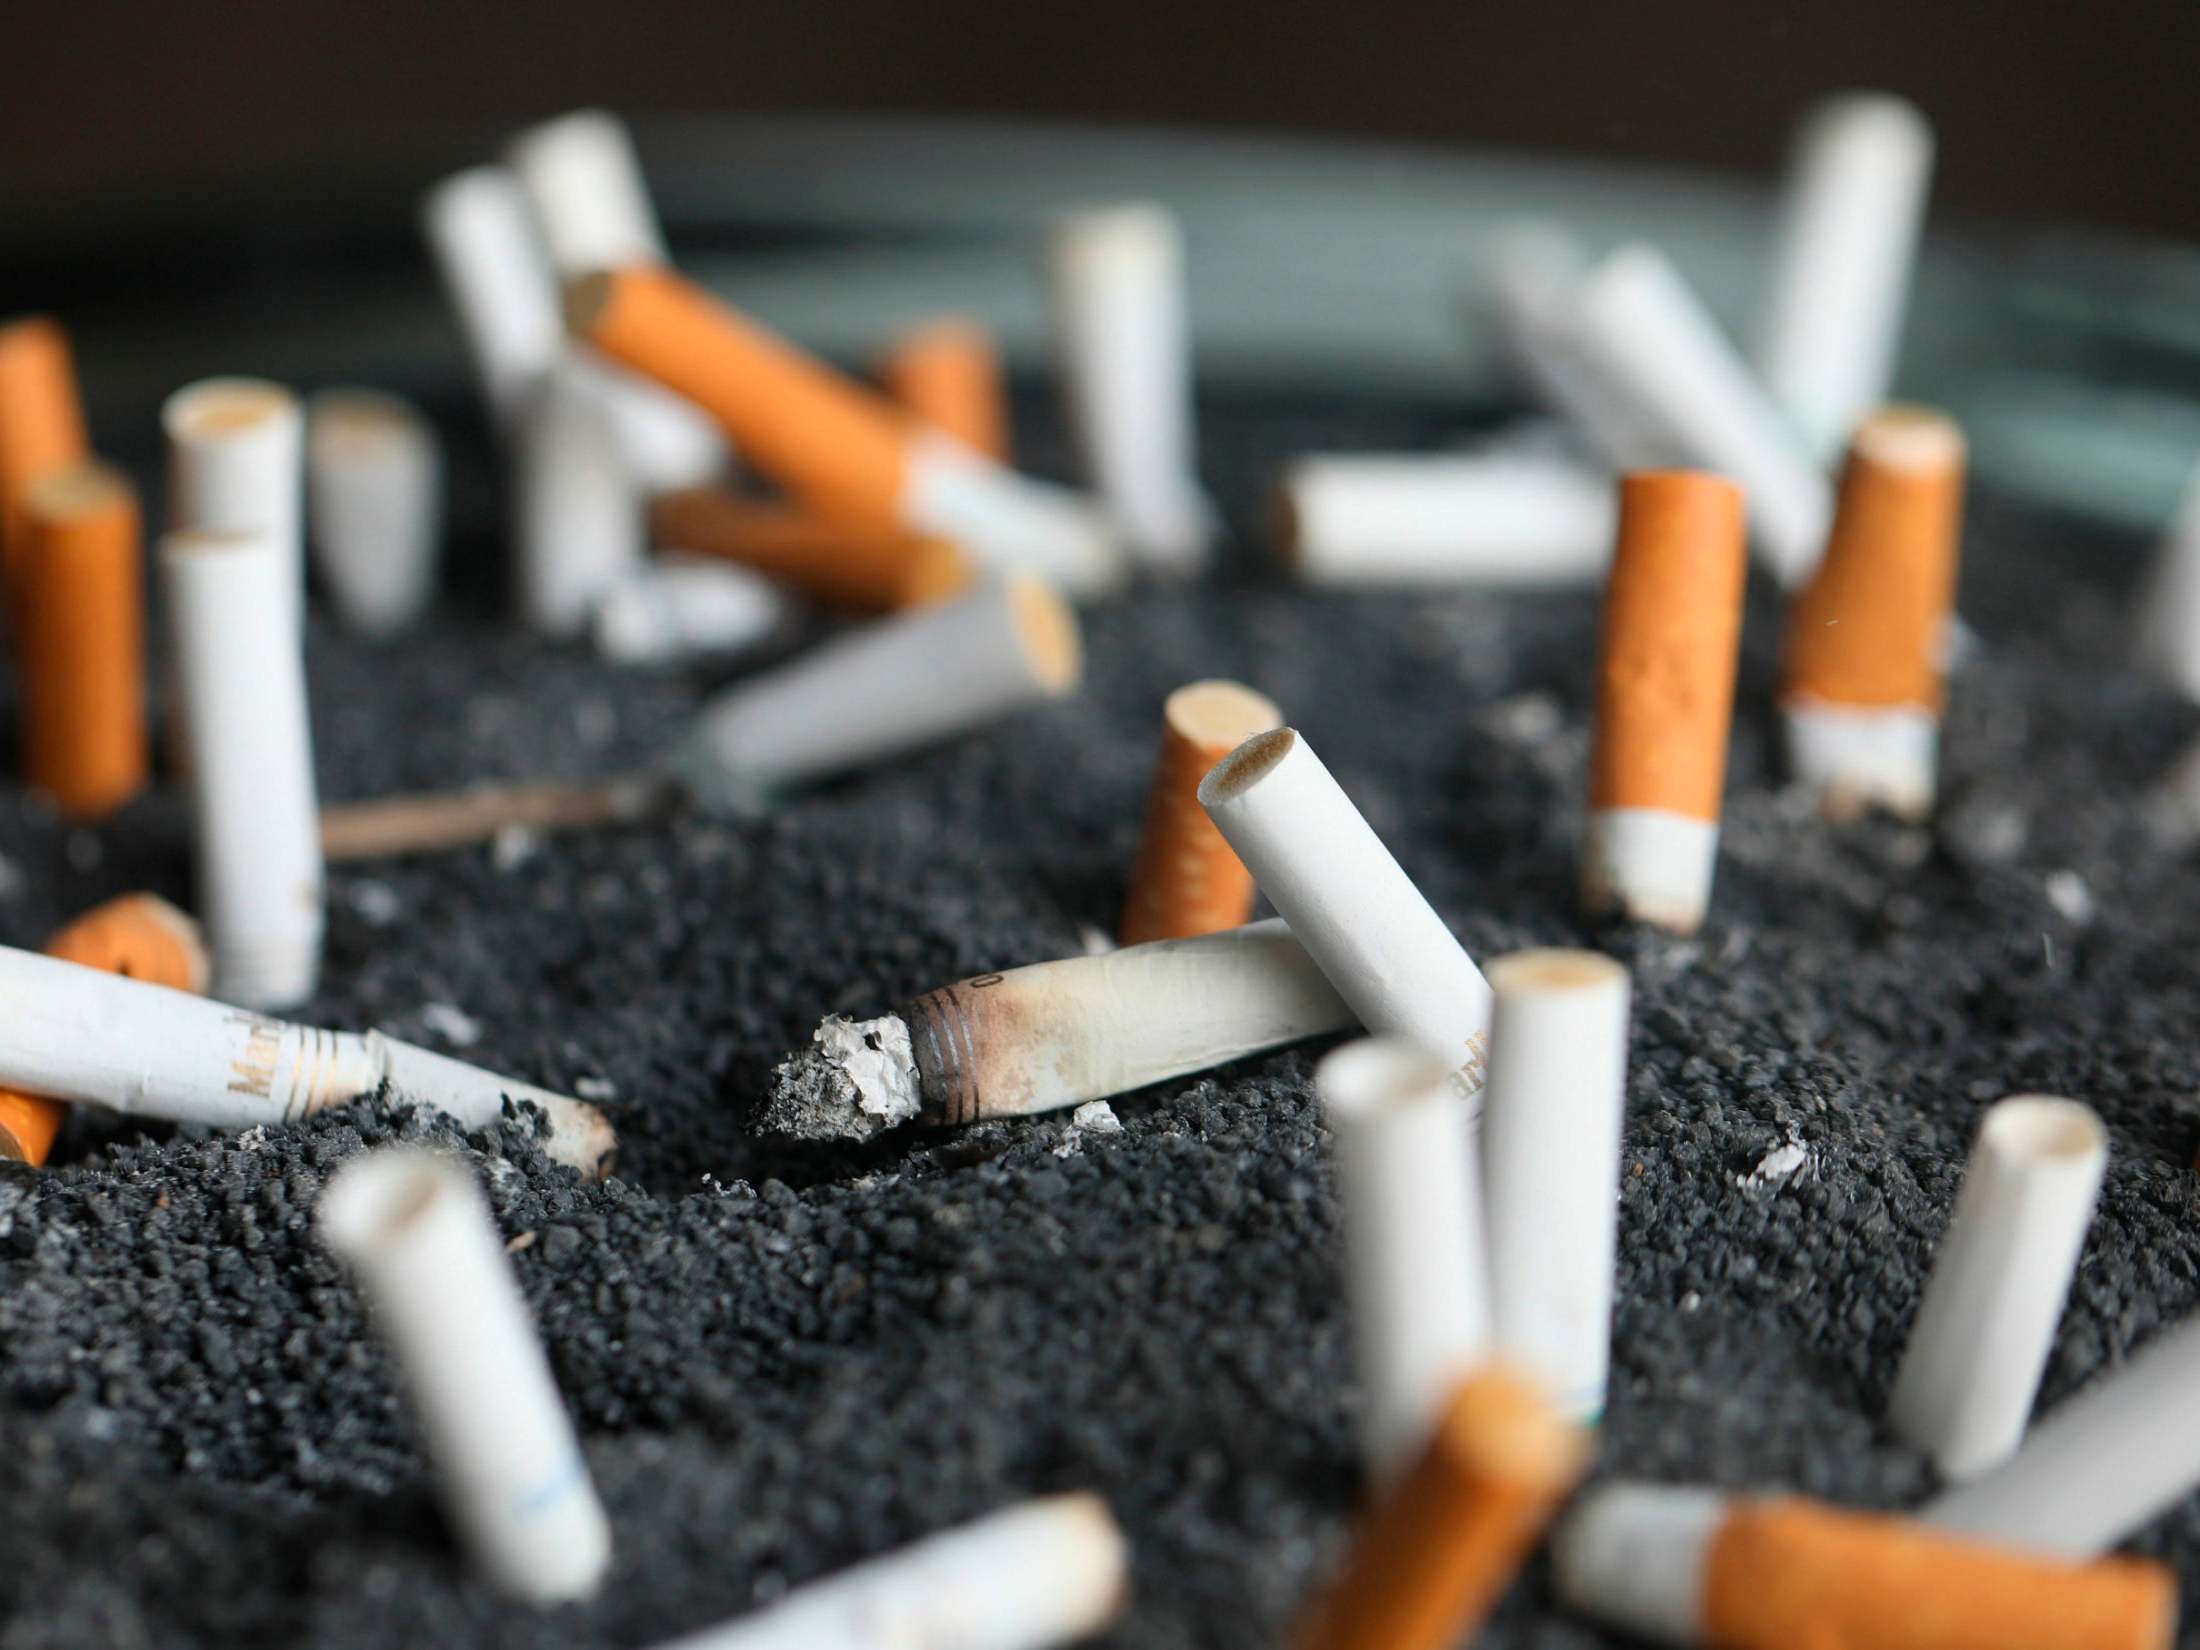 This 28 March 2019 photo shows cigarette butts in an ashtray in New York. On 8 January 2020, researchers reported the largest-ever decline in the US cancer death rate, and they are crediting advances in the treatment of lung tumors